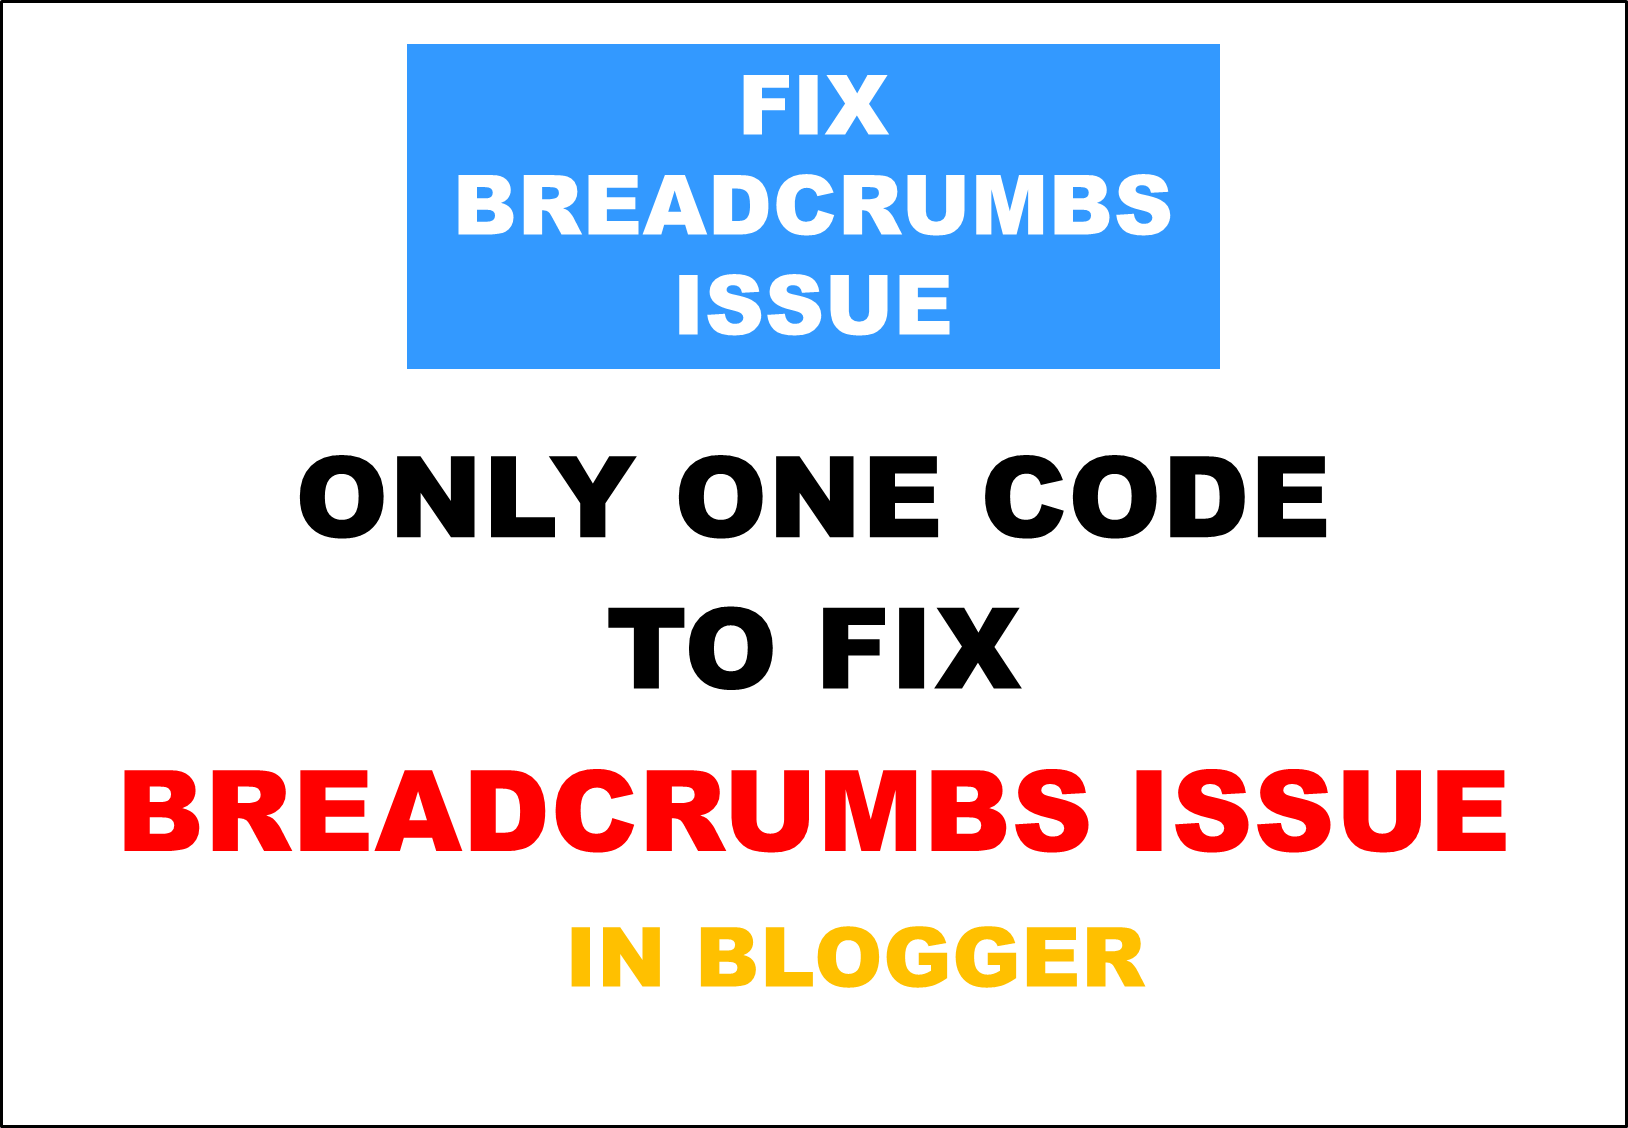 Only one code to fix breadcrumbs issues in blogger